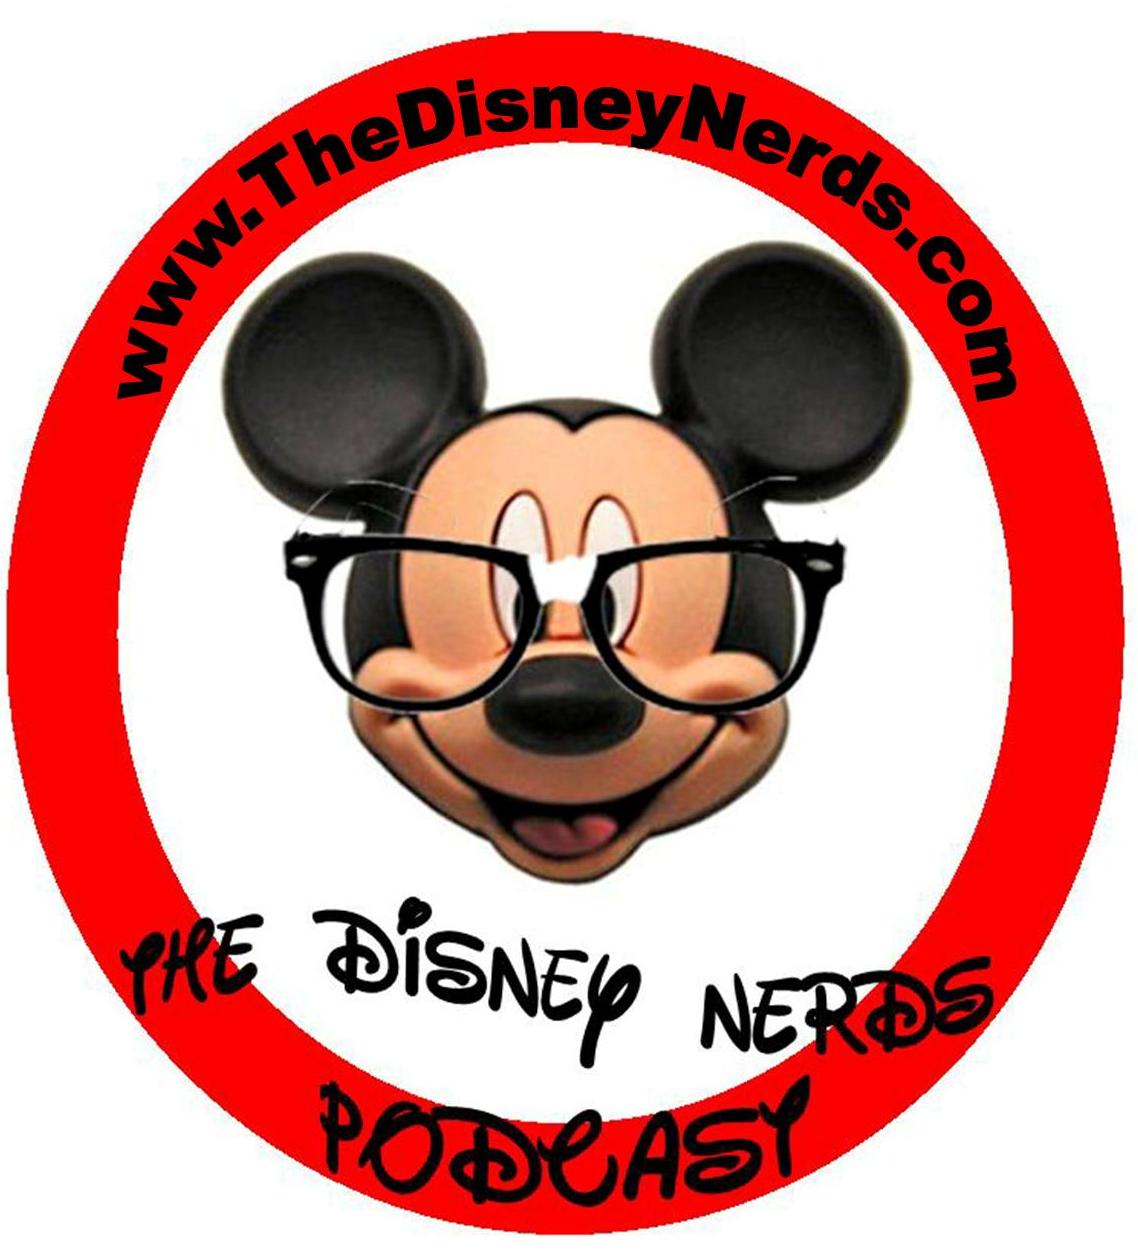 Show # 32 of the Disney Nerds Podcast